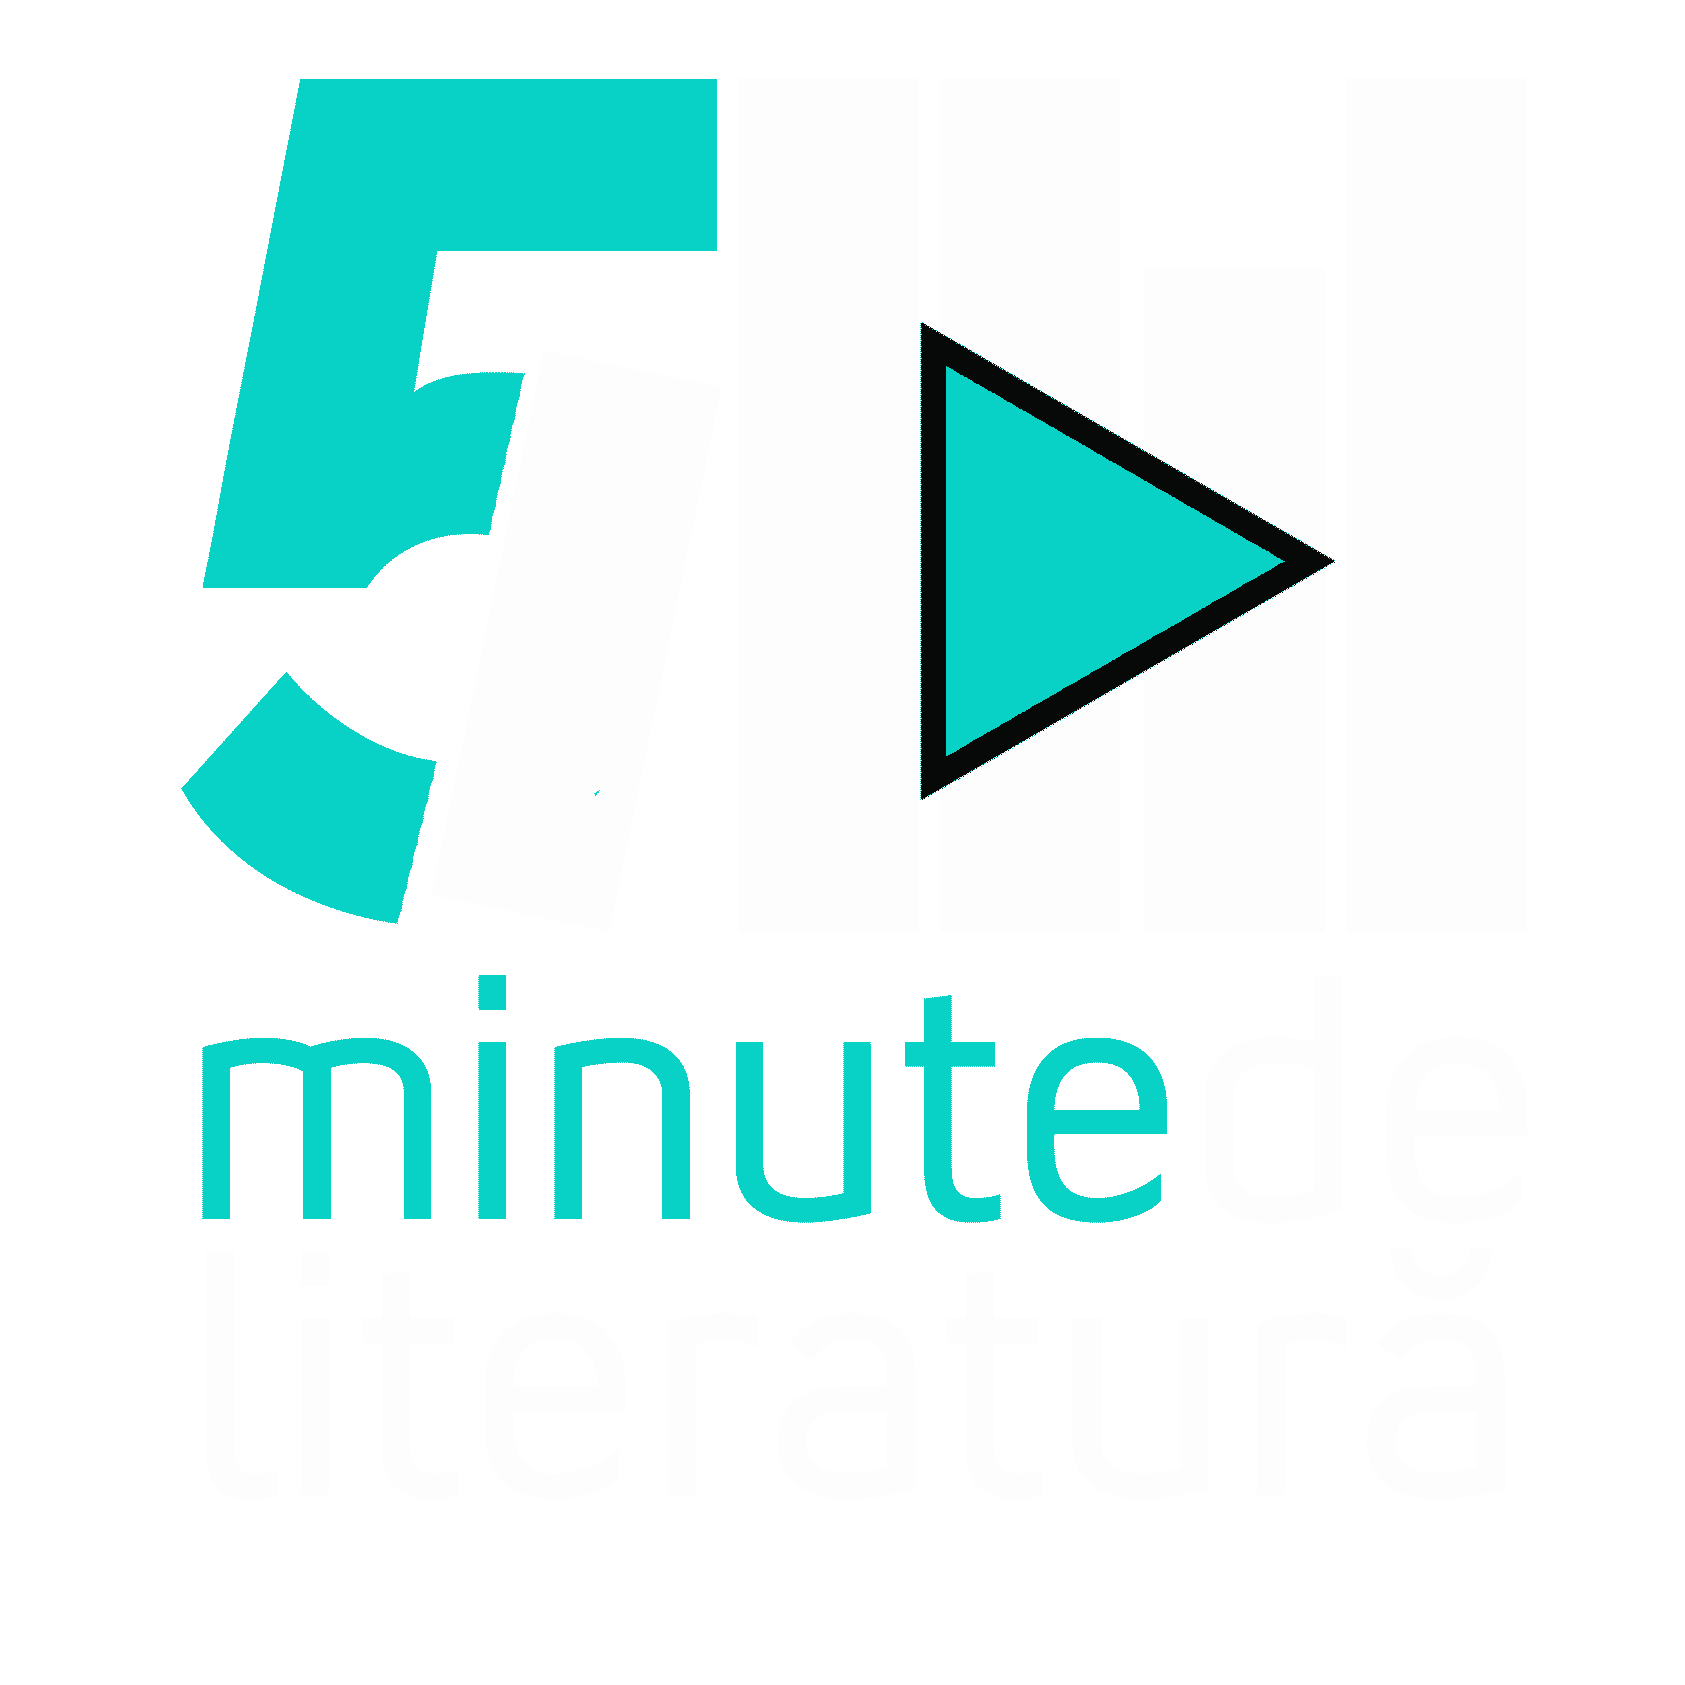 5 minute